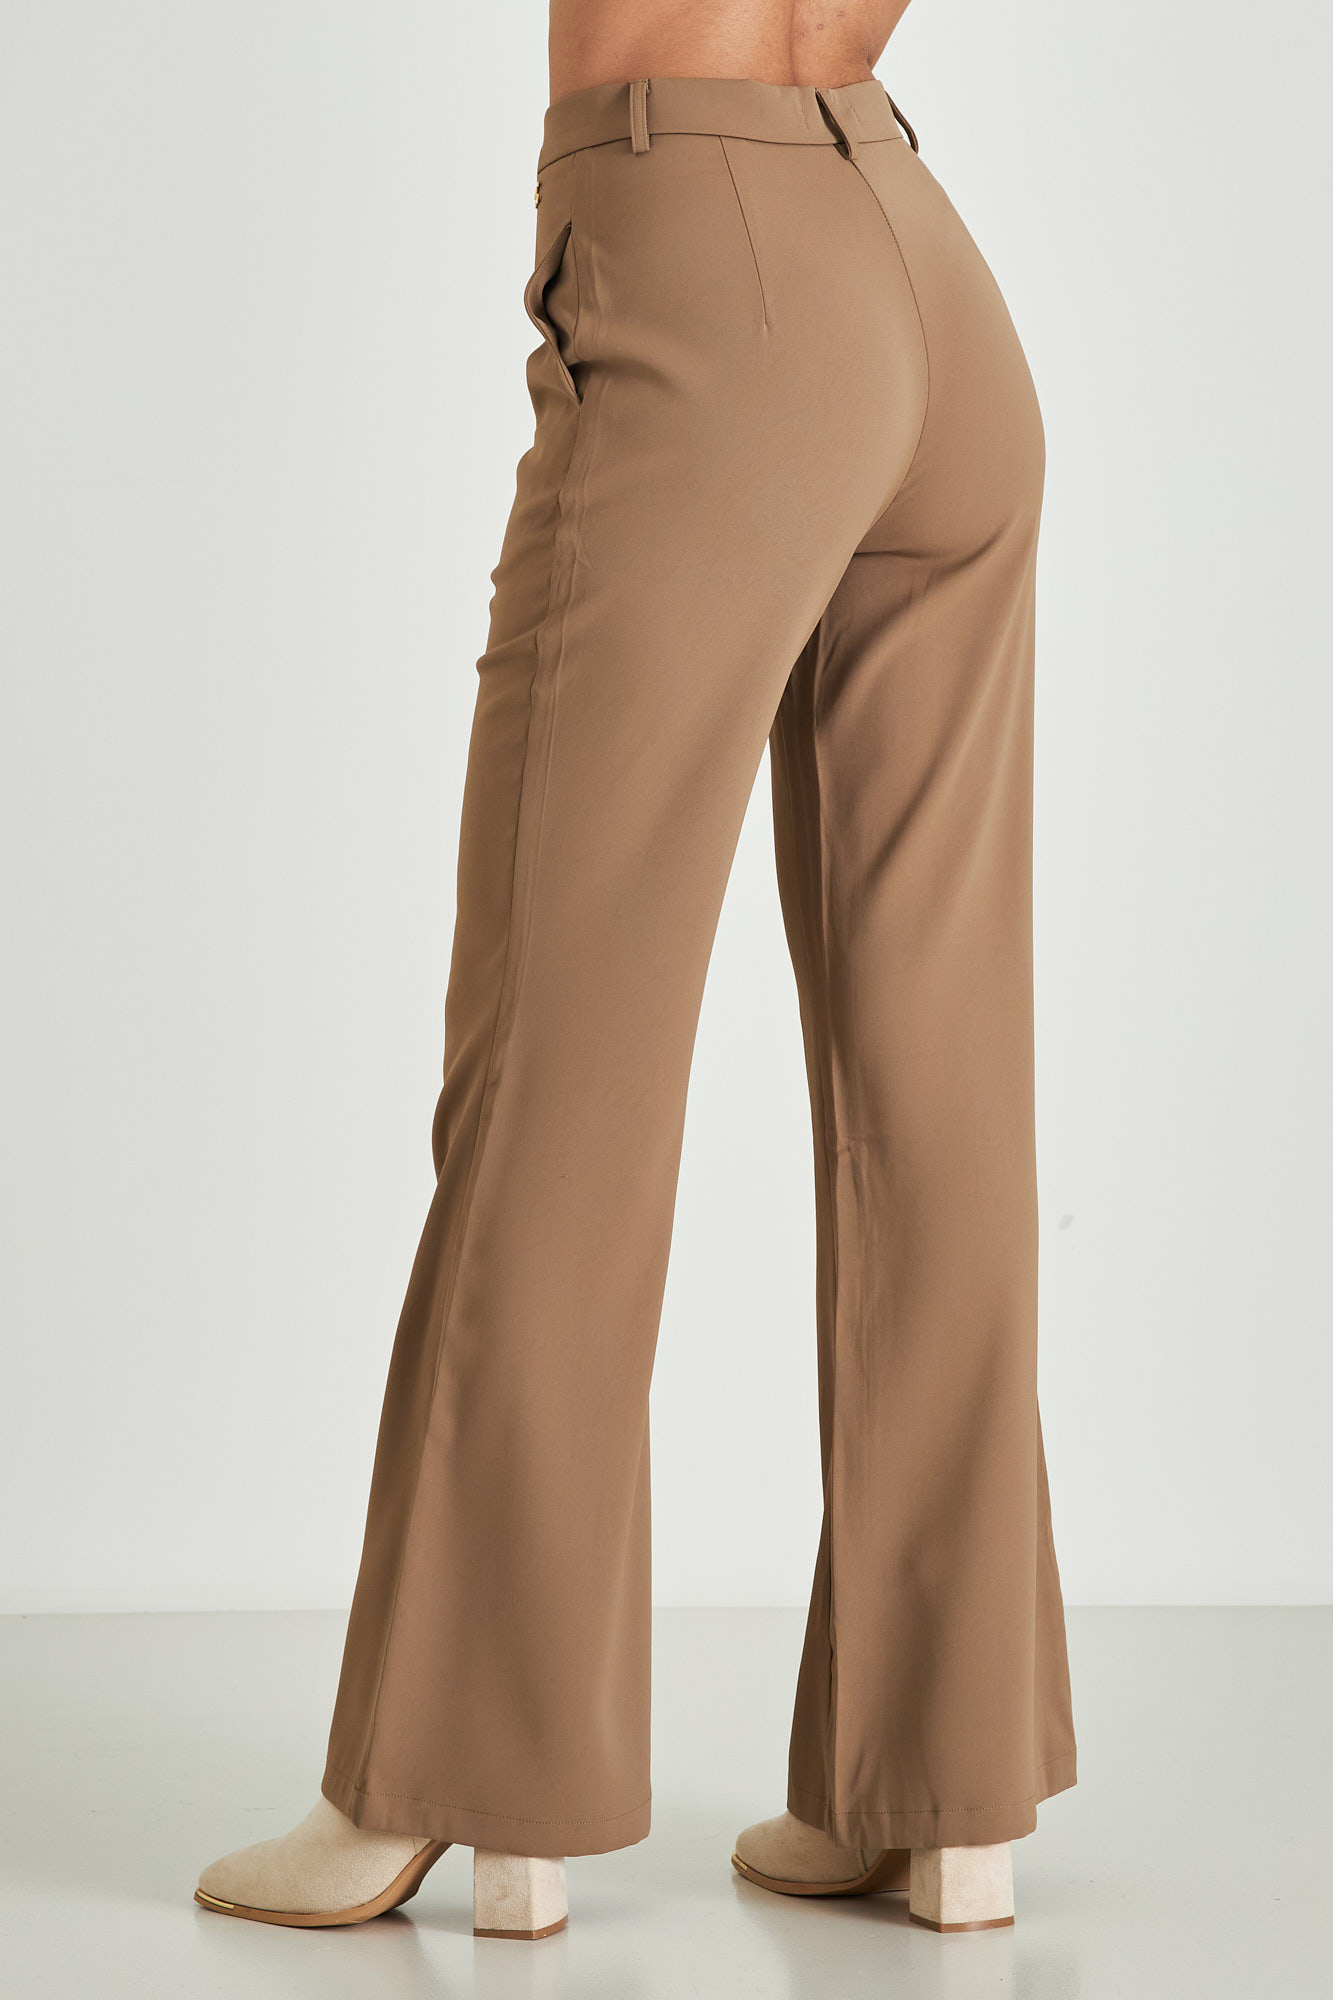 Picture of Tailored pants with pockets